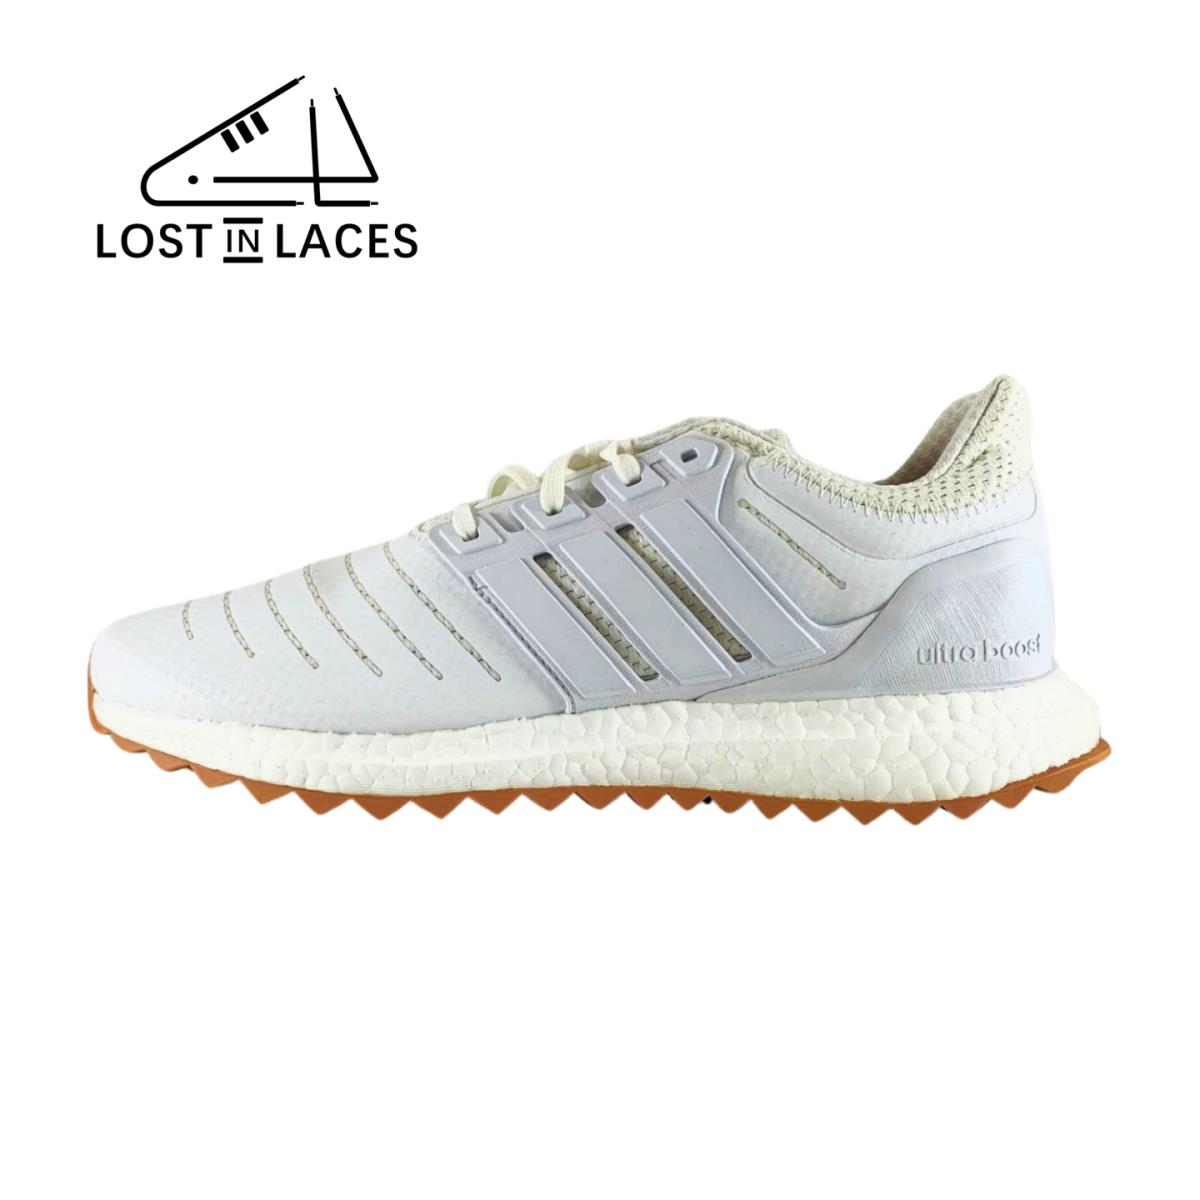 Adidas Ultraboost Dna 22 Xxii White Sneakers Running Shoes Men`s Sizes